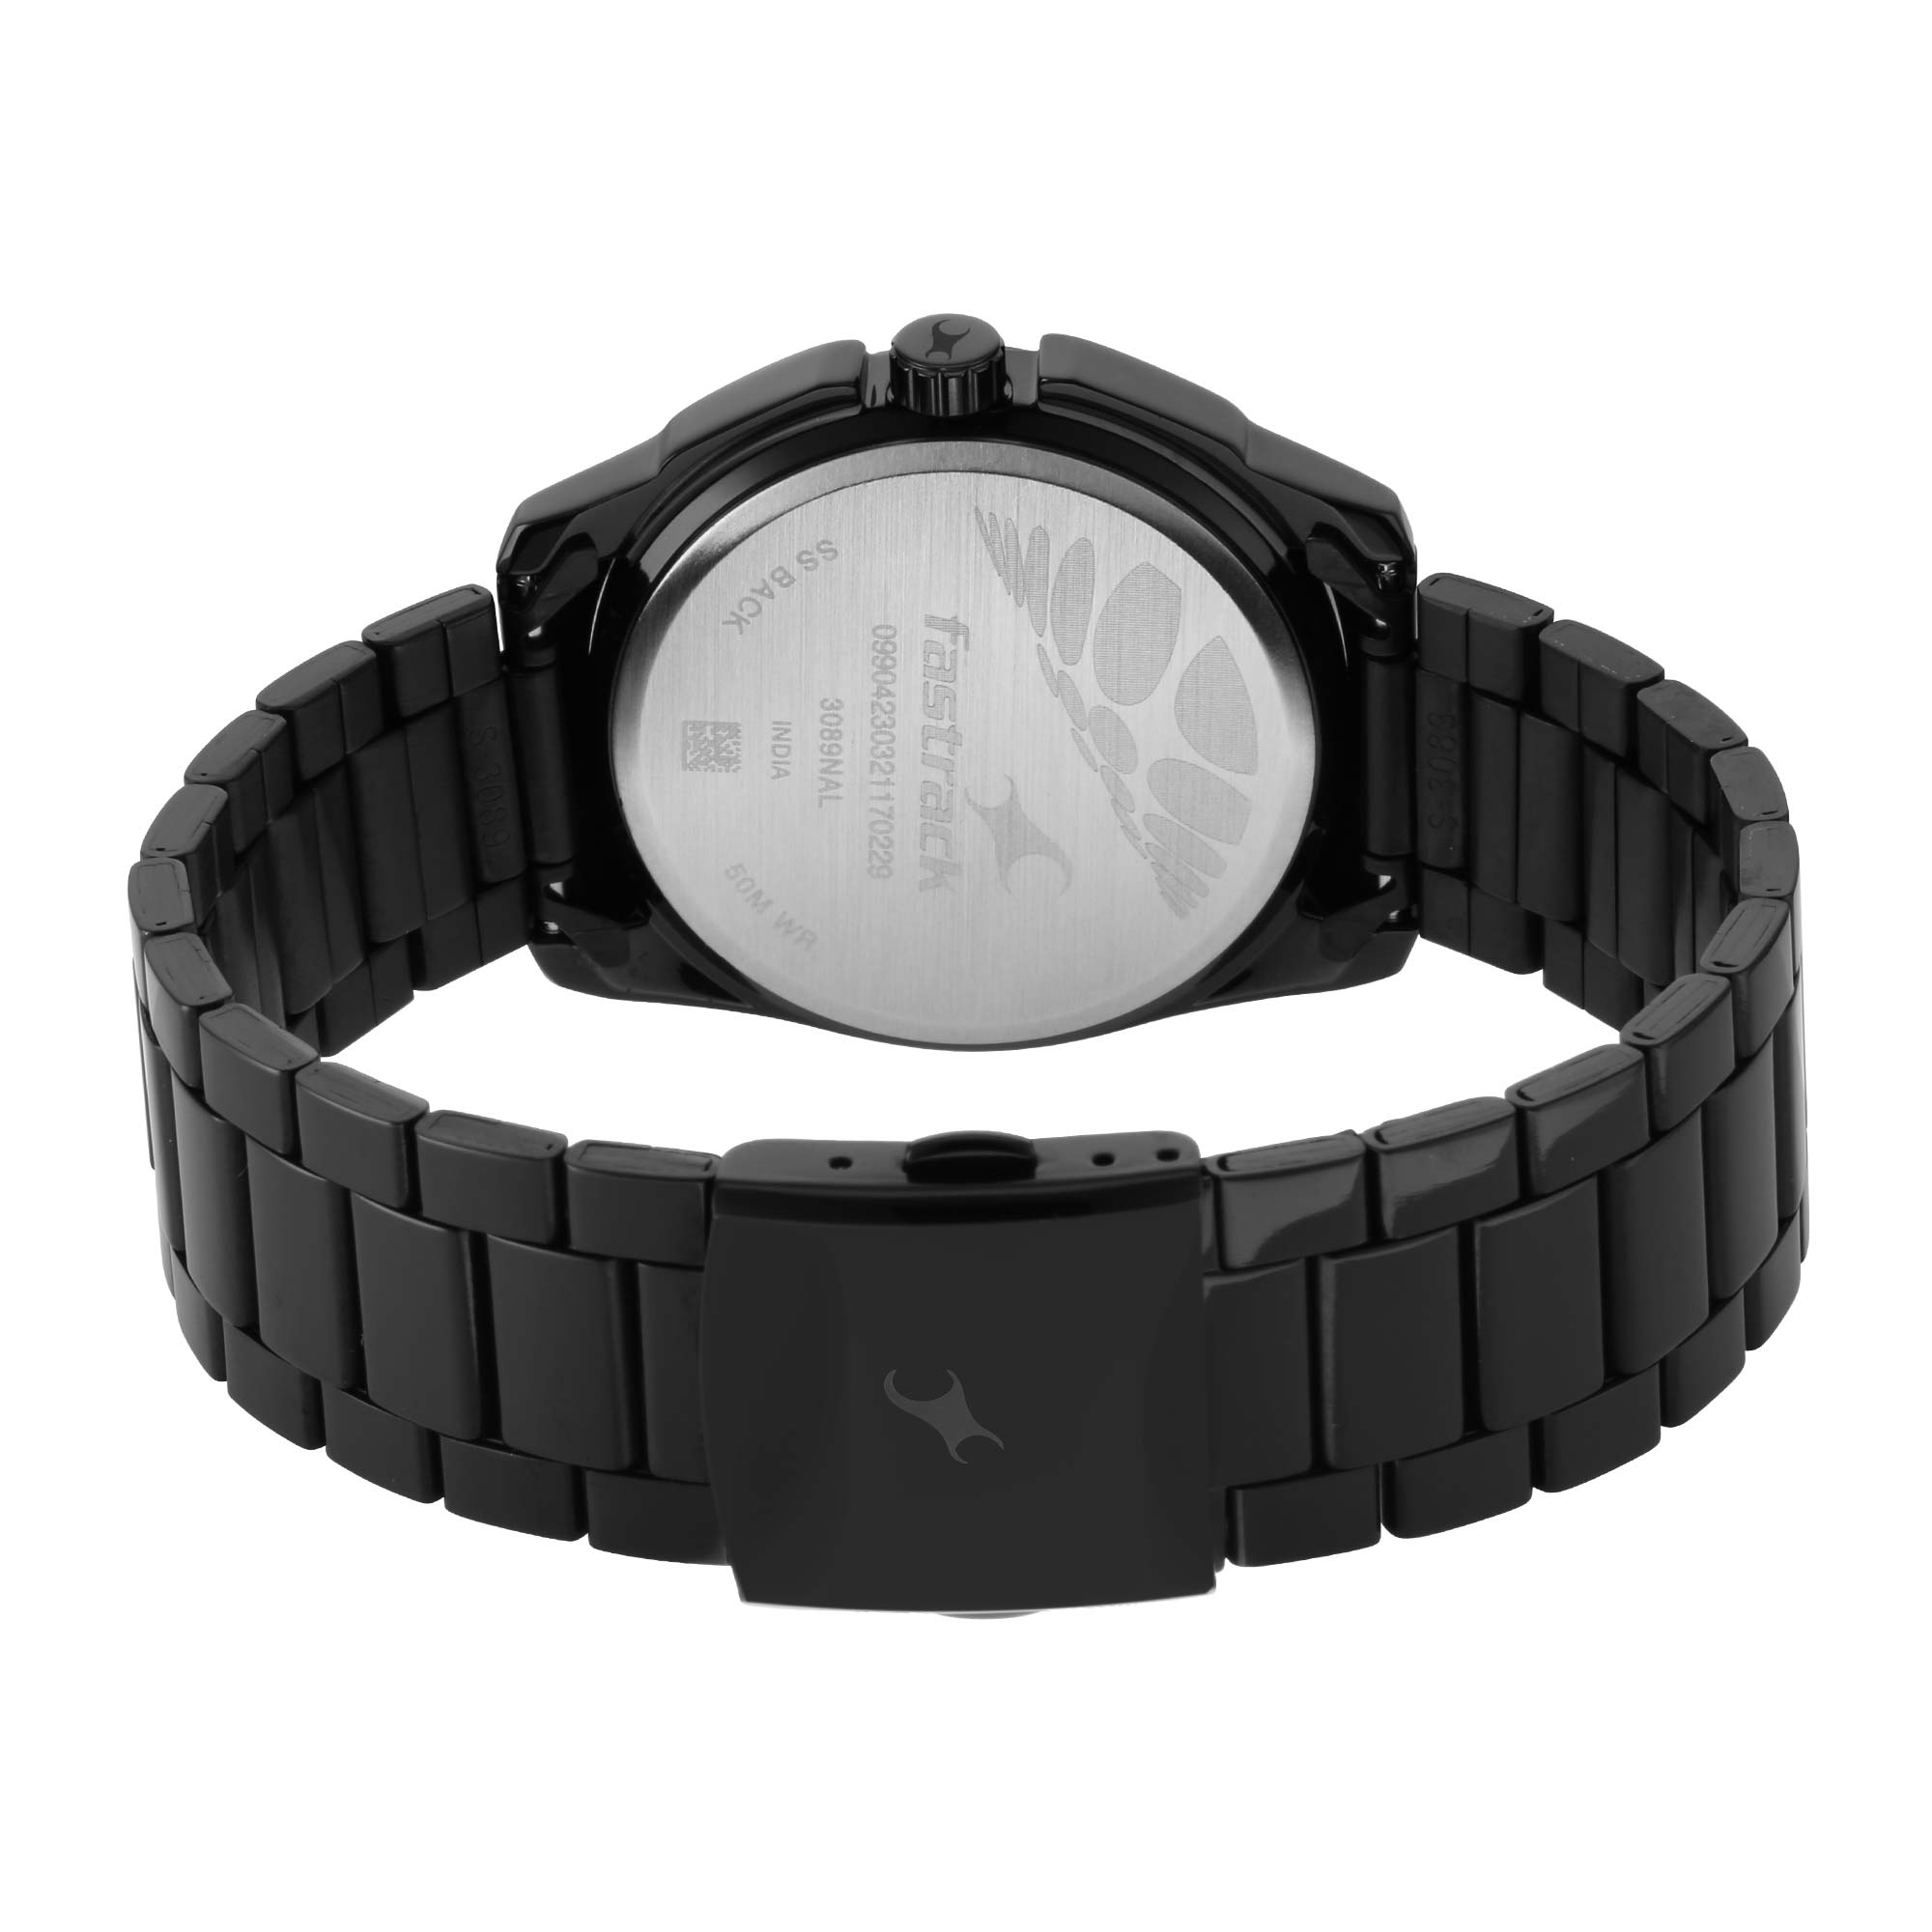 Fastrack Wear Your Look Quartz Analog Black Dial Metal Strap Watch for Guys